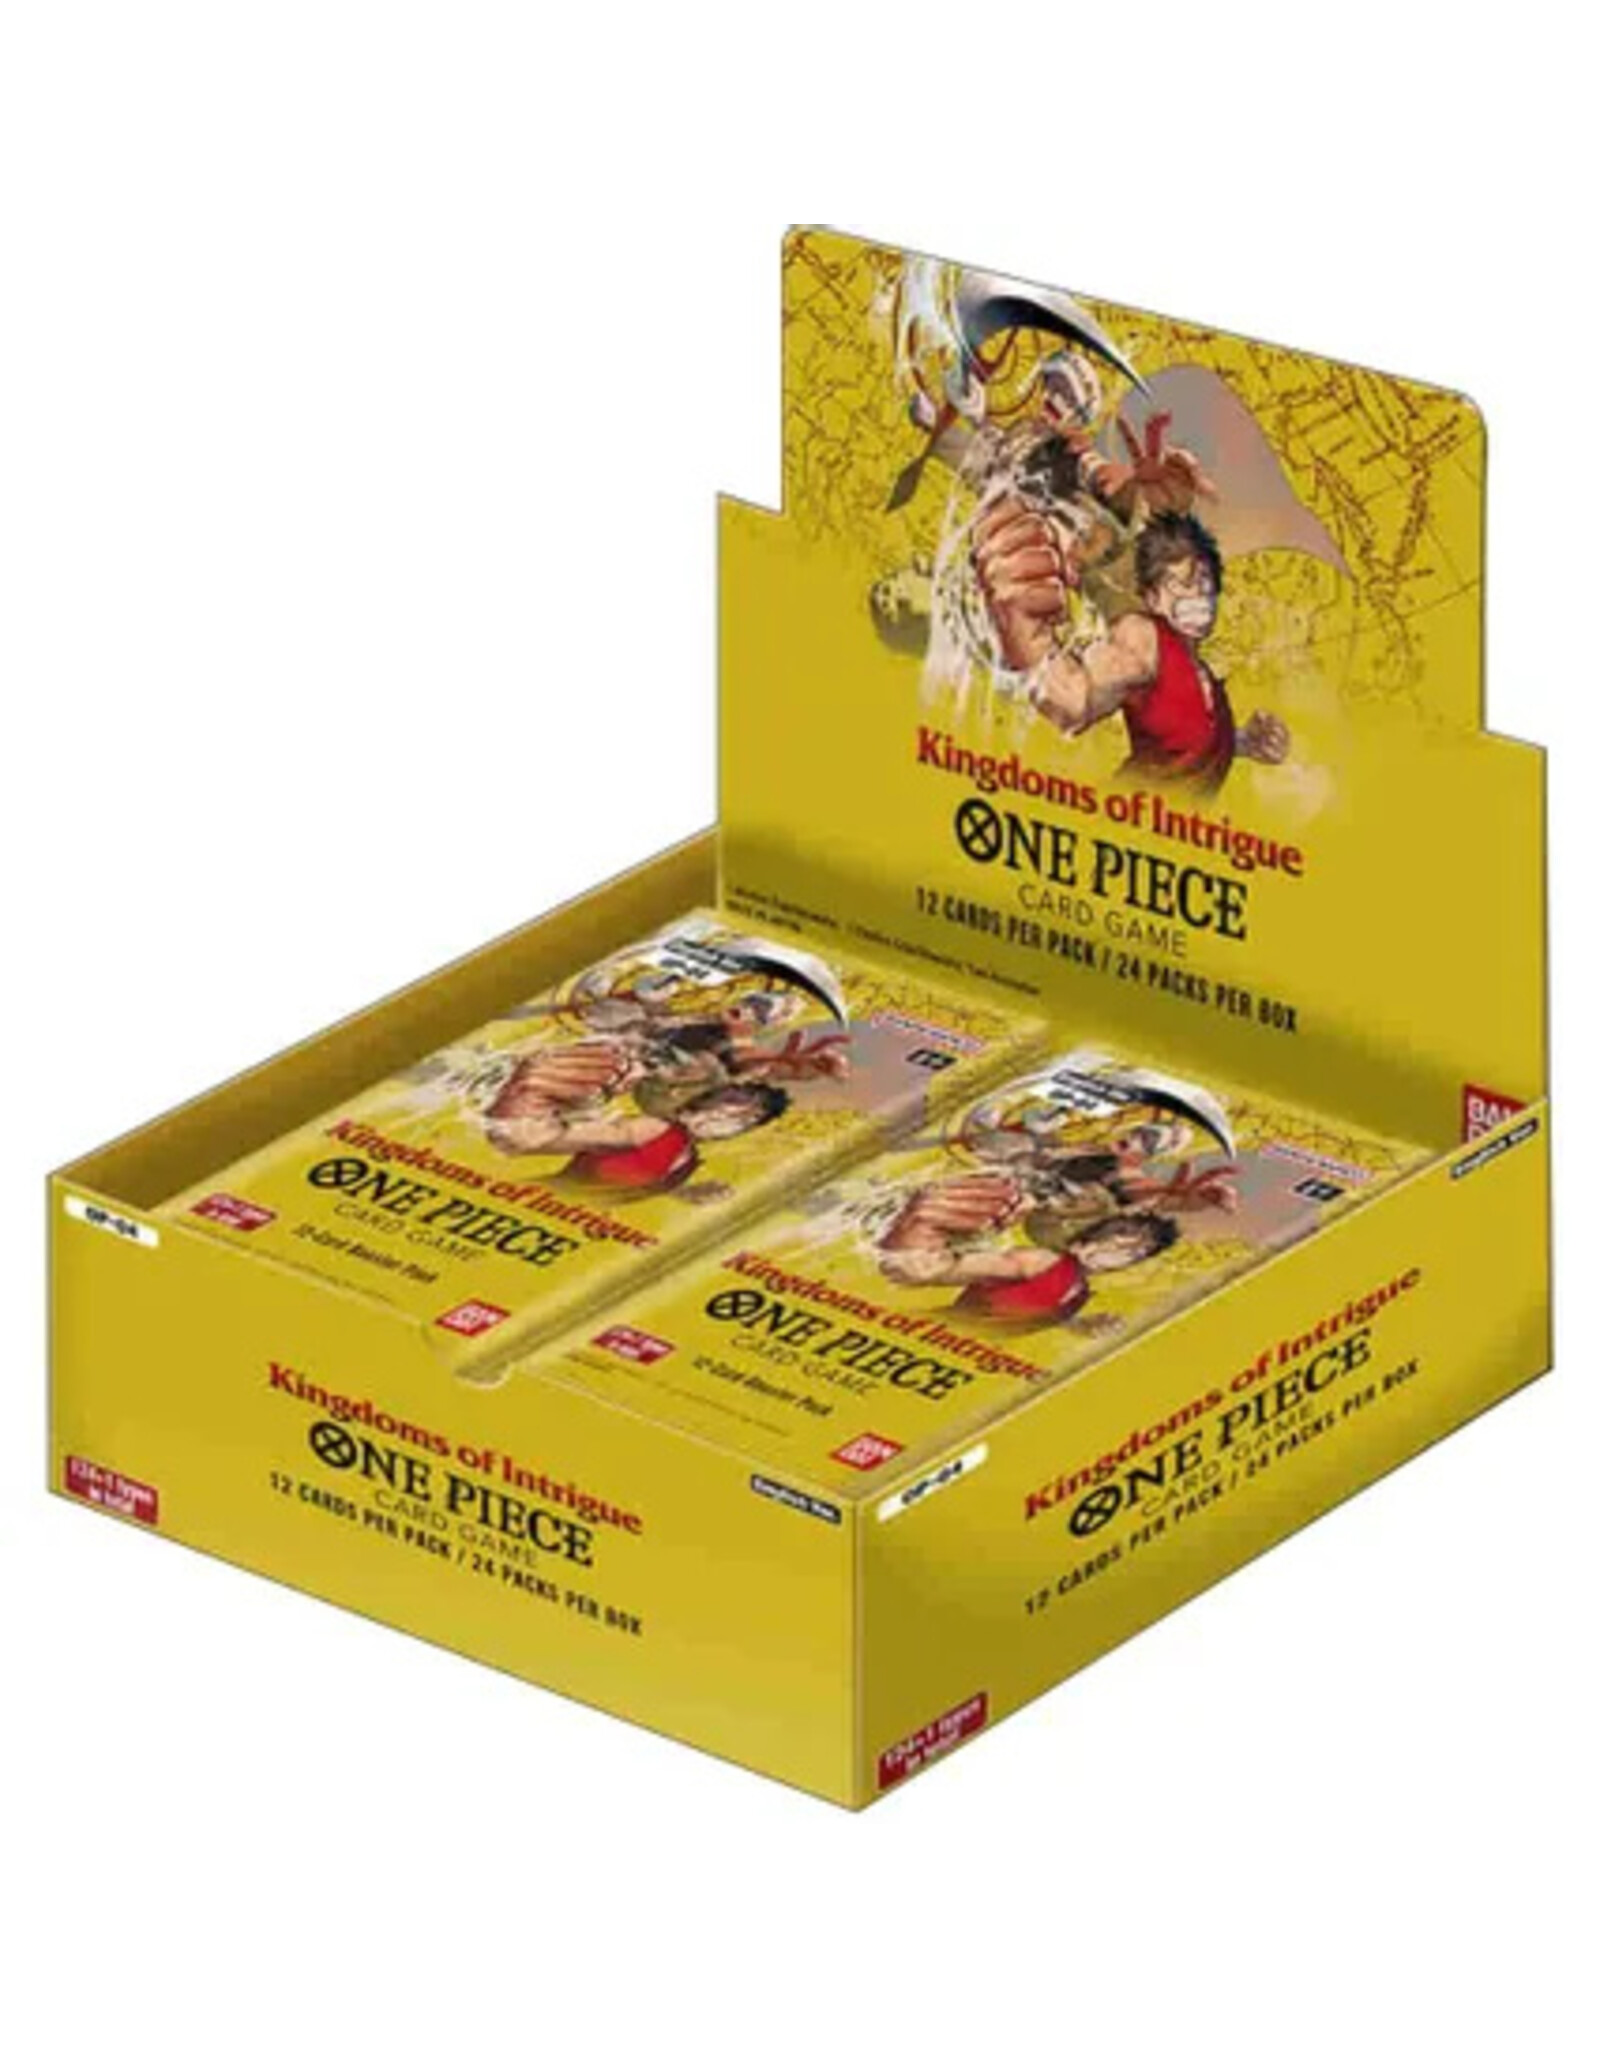 One Piece TCG: Kingdoms of Intrigue Booster Box Sealed Case (12 boosters)